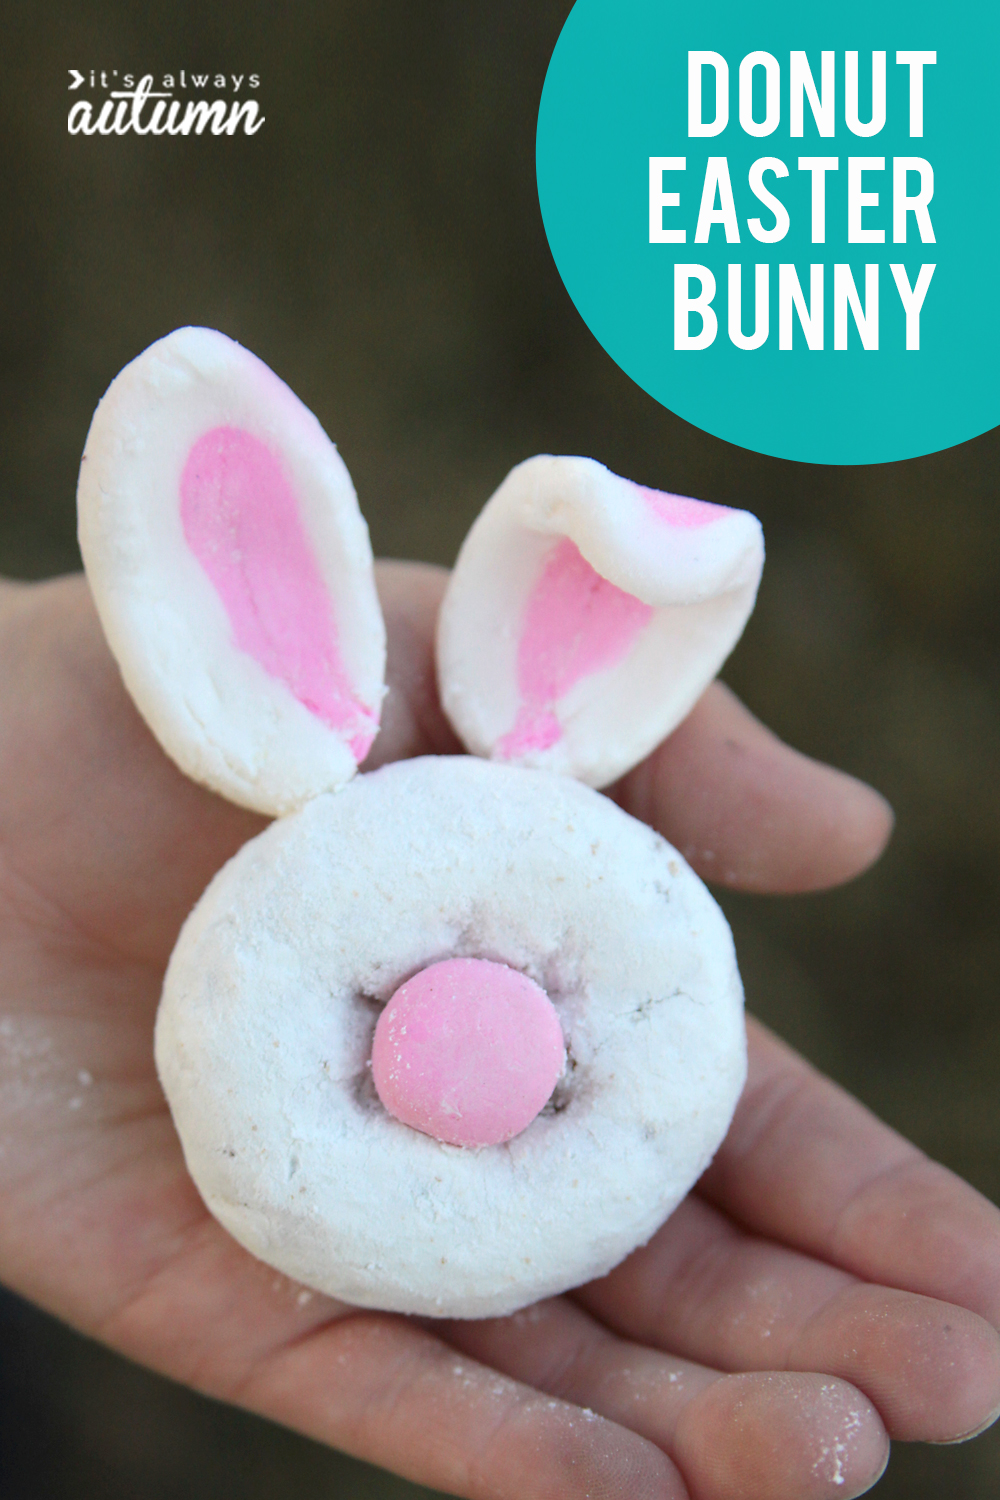 Donut Easter bunnies! Fun Easter food craft for kids.